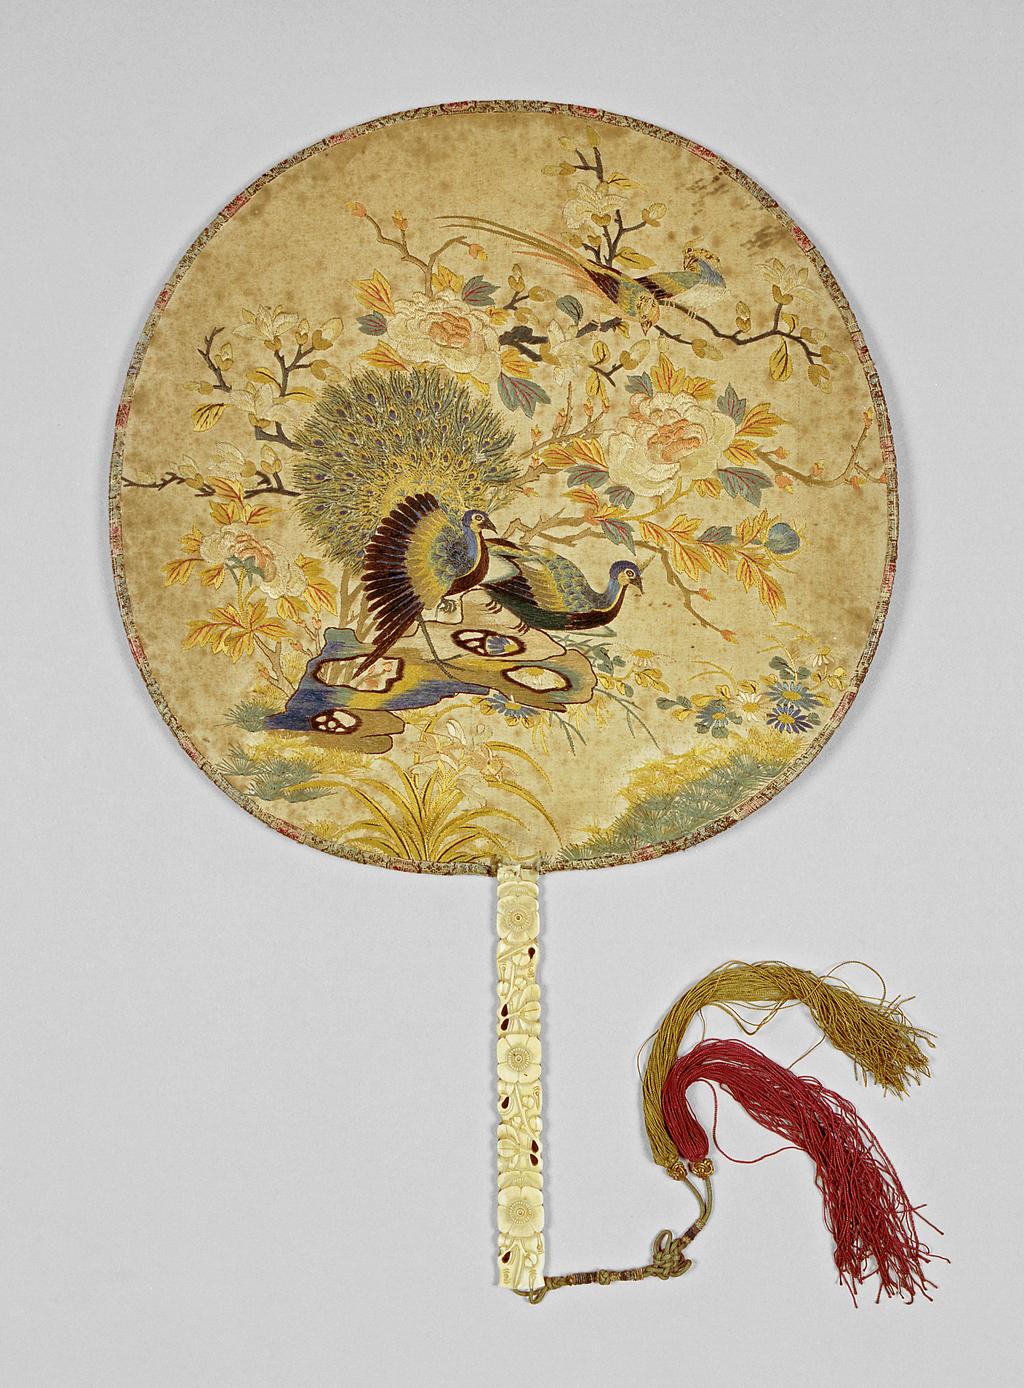 An image of Screen fan/pien mien. Unknown maker, China. Decorated with peacocks and orioles with flowering tree peonies, magnolias and rocks, the stick formed as flowering prunus. Stick: ivory carved in relief and pierced; knotted string of green silk bound in blue, with red and gold tassels, with sliding gilt paper-wrapped toggles. Rim: brocade covered. Face: polychrome silk embroidered on satin. Height, guards, 40.3 cm, width, whole, 26.6 cm, after 1770 to before 1830. Collection: Messel-Rosse Collection.